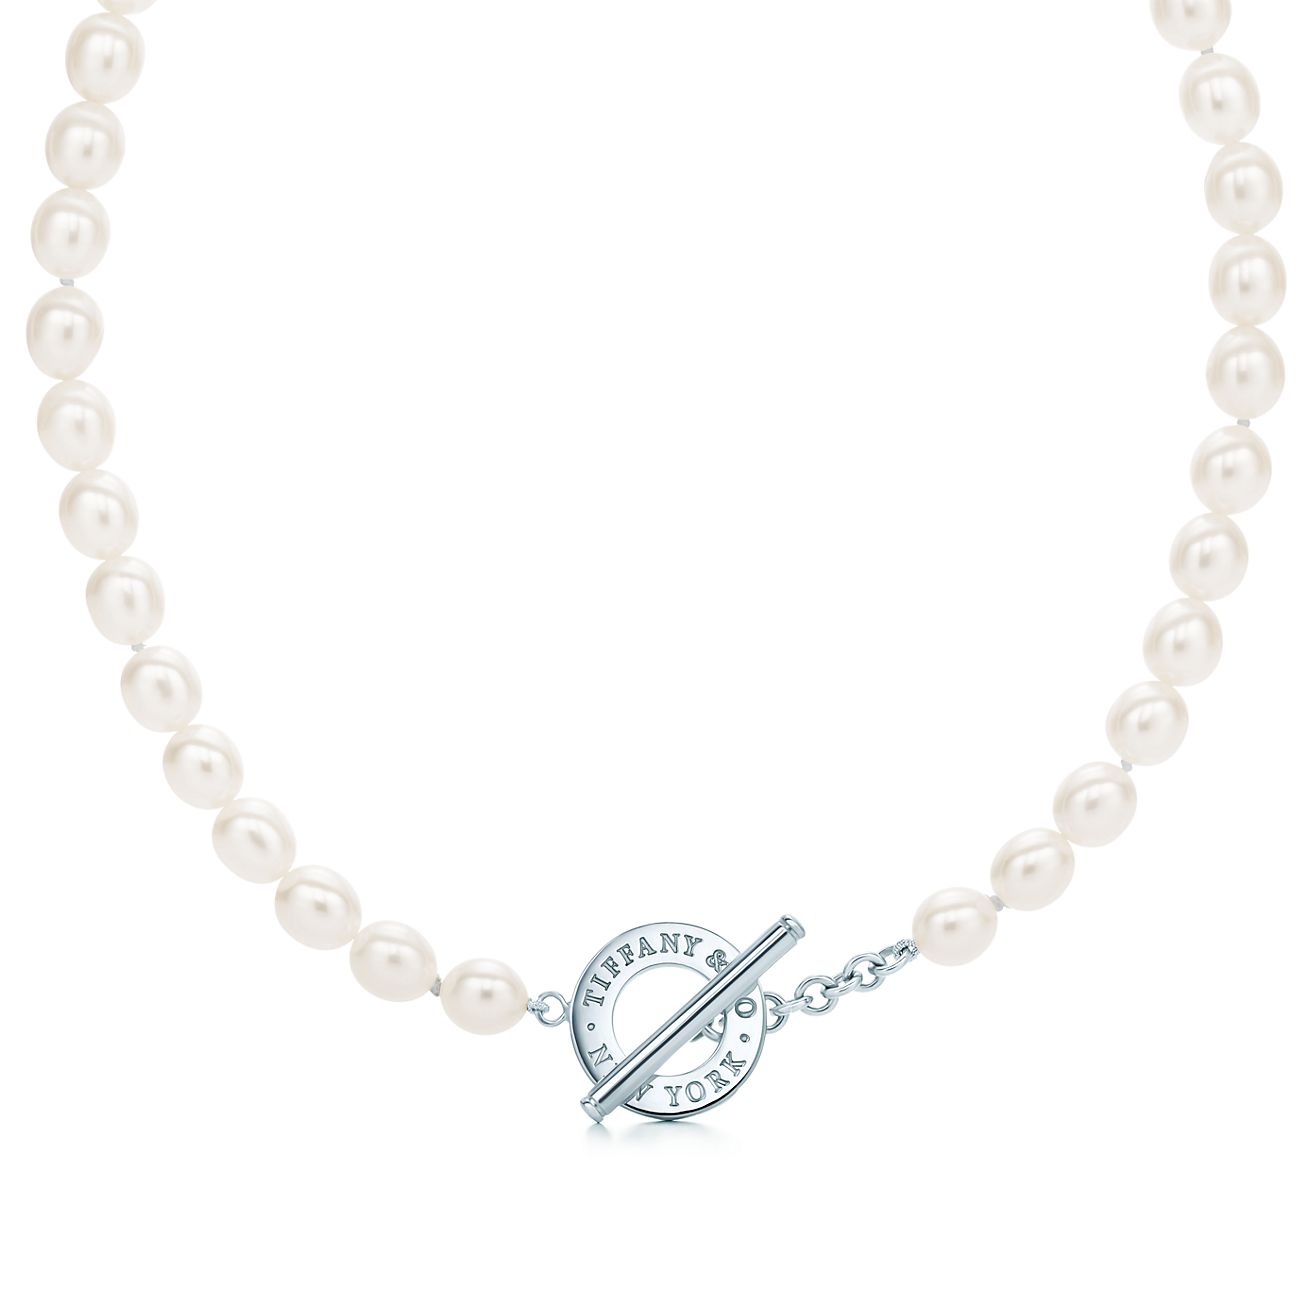 Freshwater pearl toggle necklace in sterling silver.